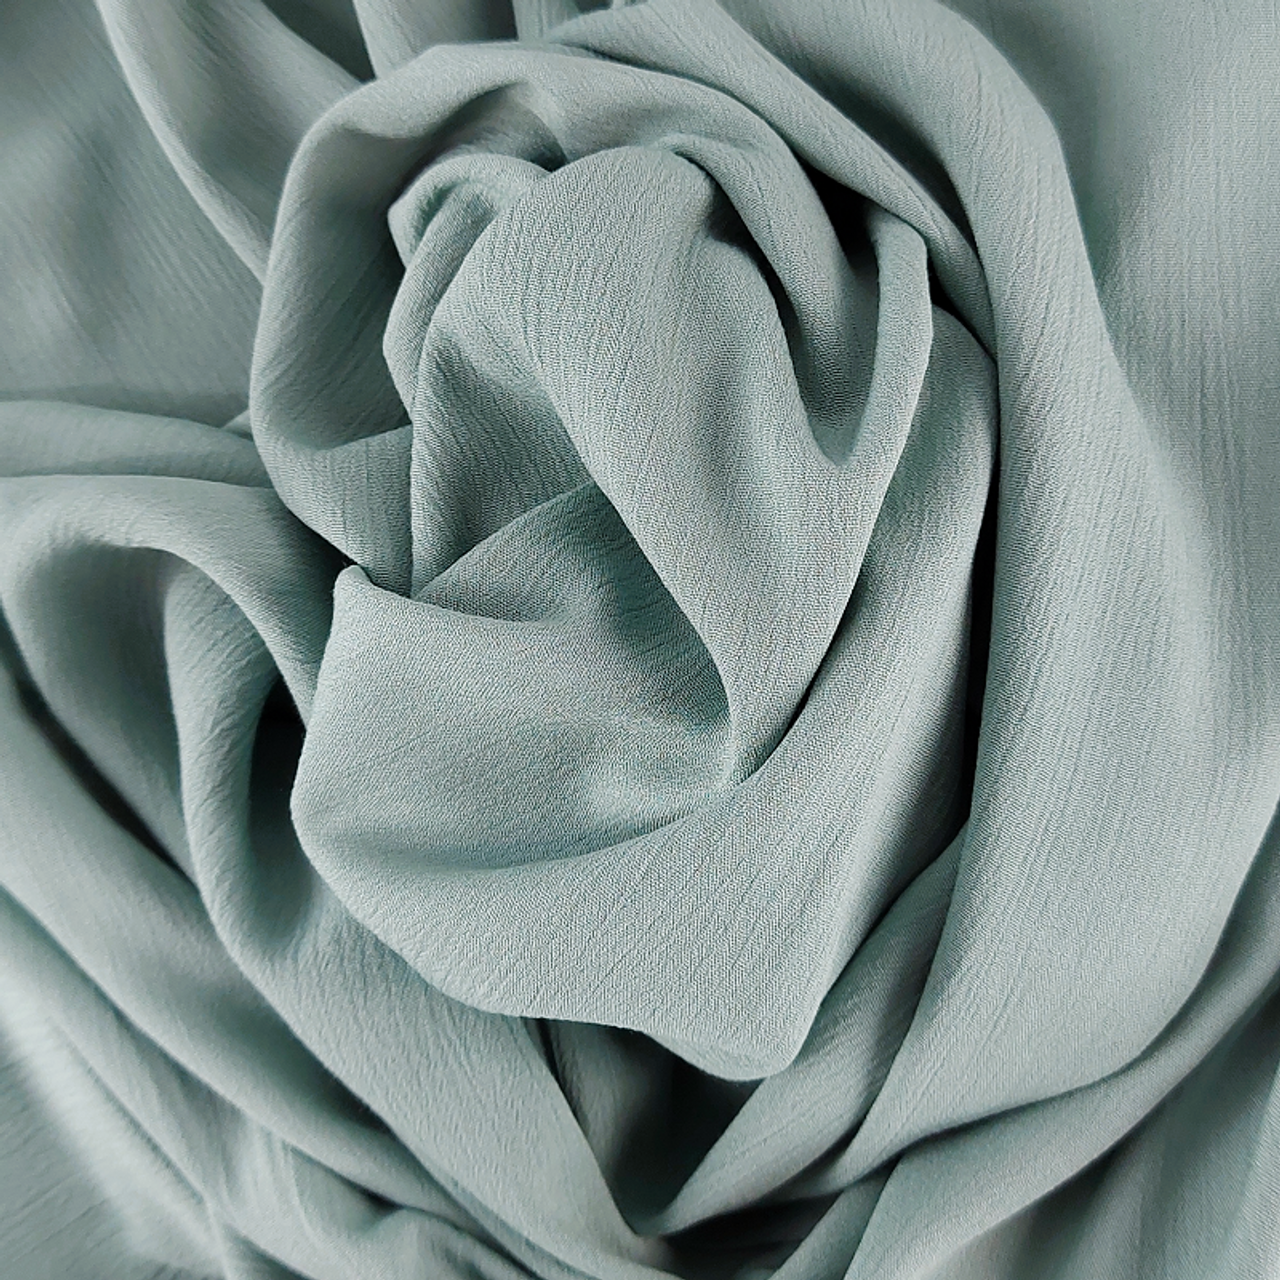 A beautiful Borken Crepe fabric for ladies apparel wear.